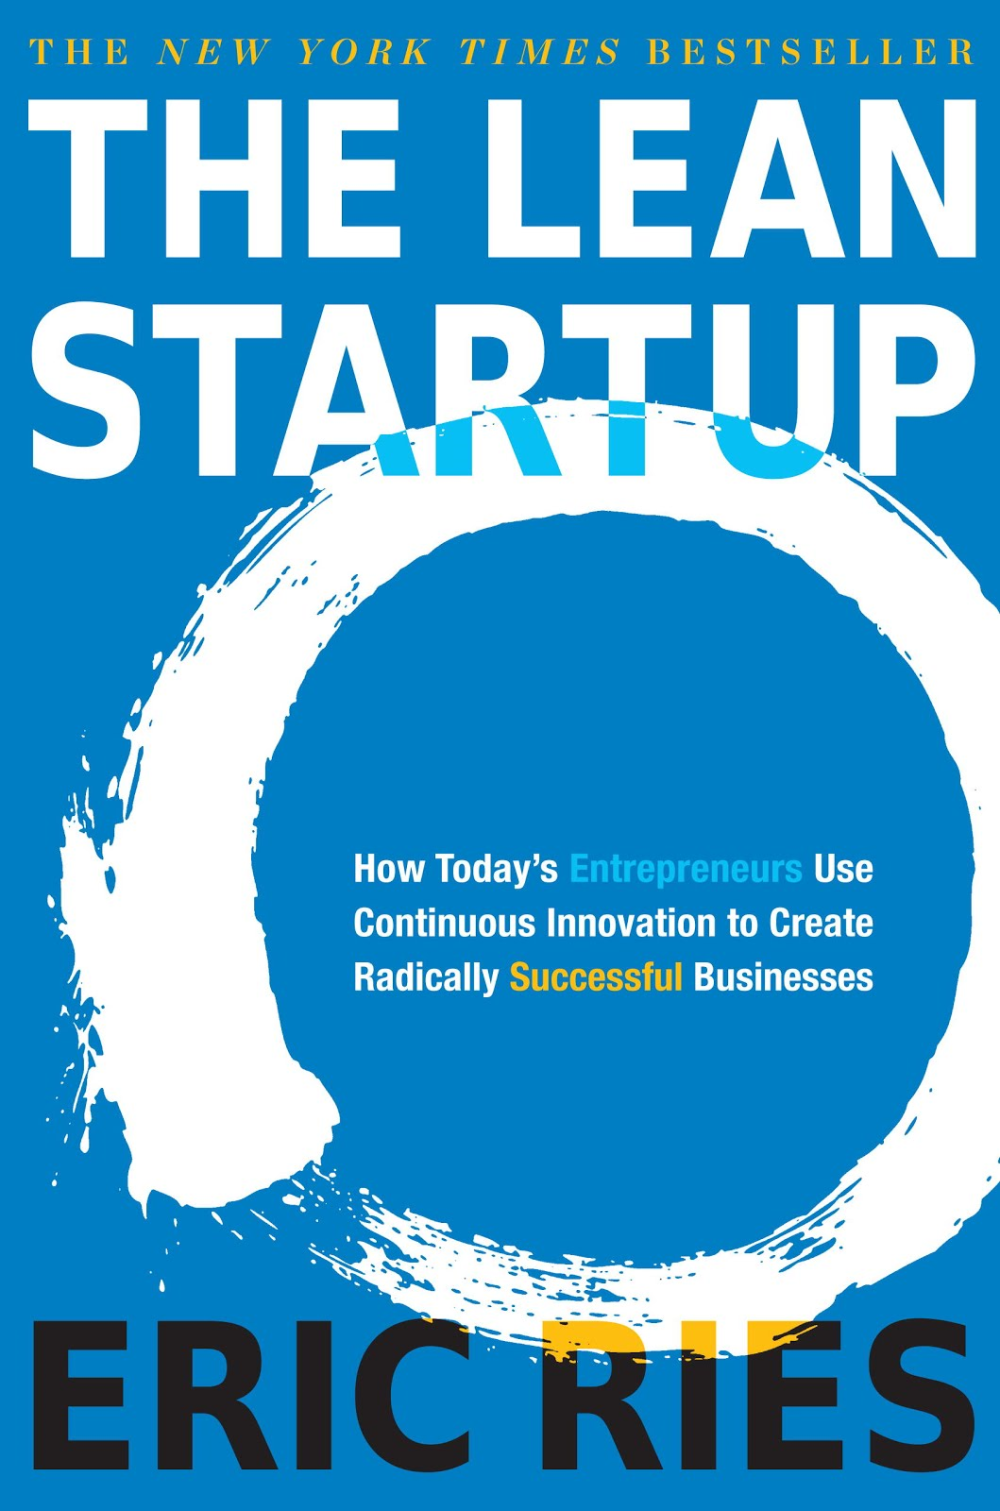 The Lean Startup cover features a roughly painted circle design